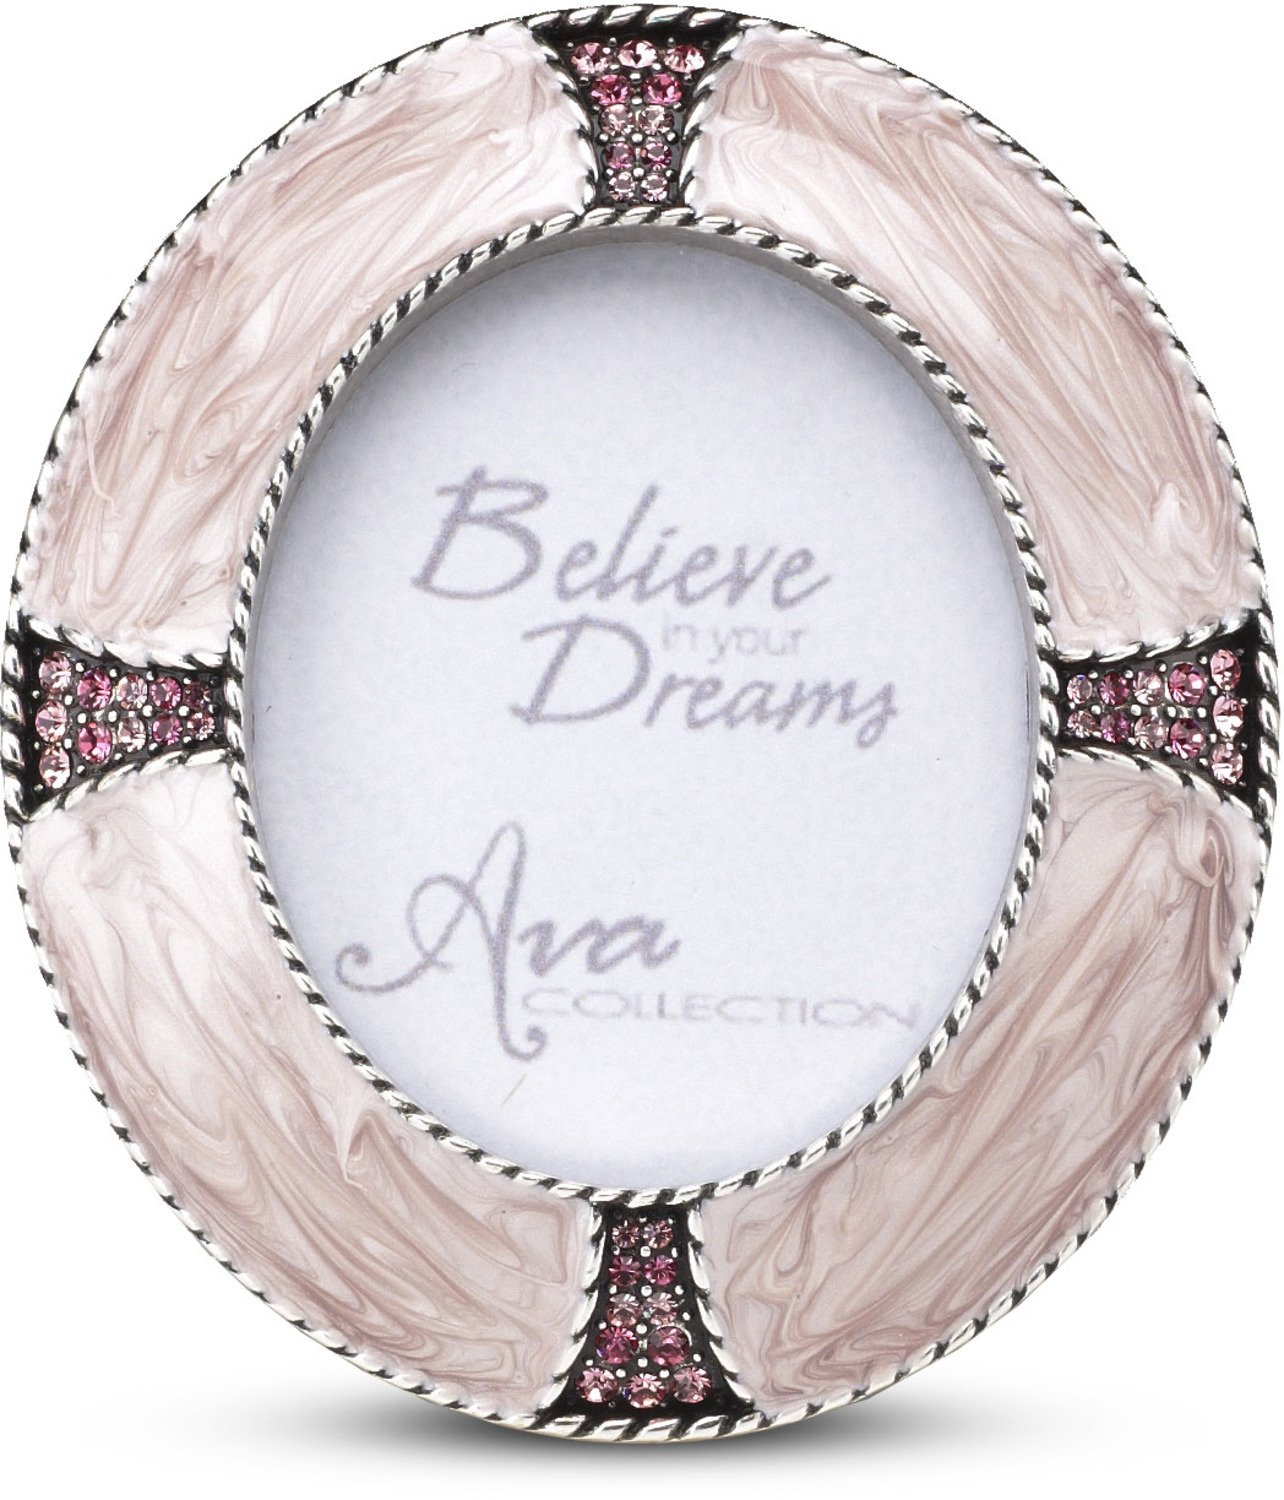 Pink Rose Oval Photo Frame by Ava Collection - Pink Rose Oval Photo Frame - 3" x 3.5" Pink Frame with Gems (Holds 1.75" x 2.25" Photo)